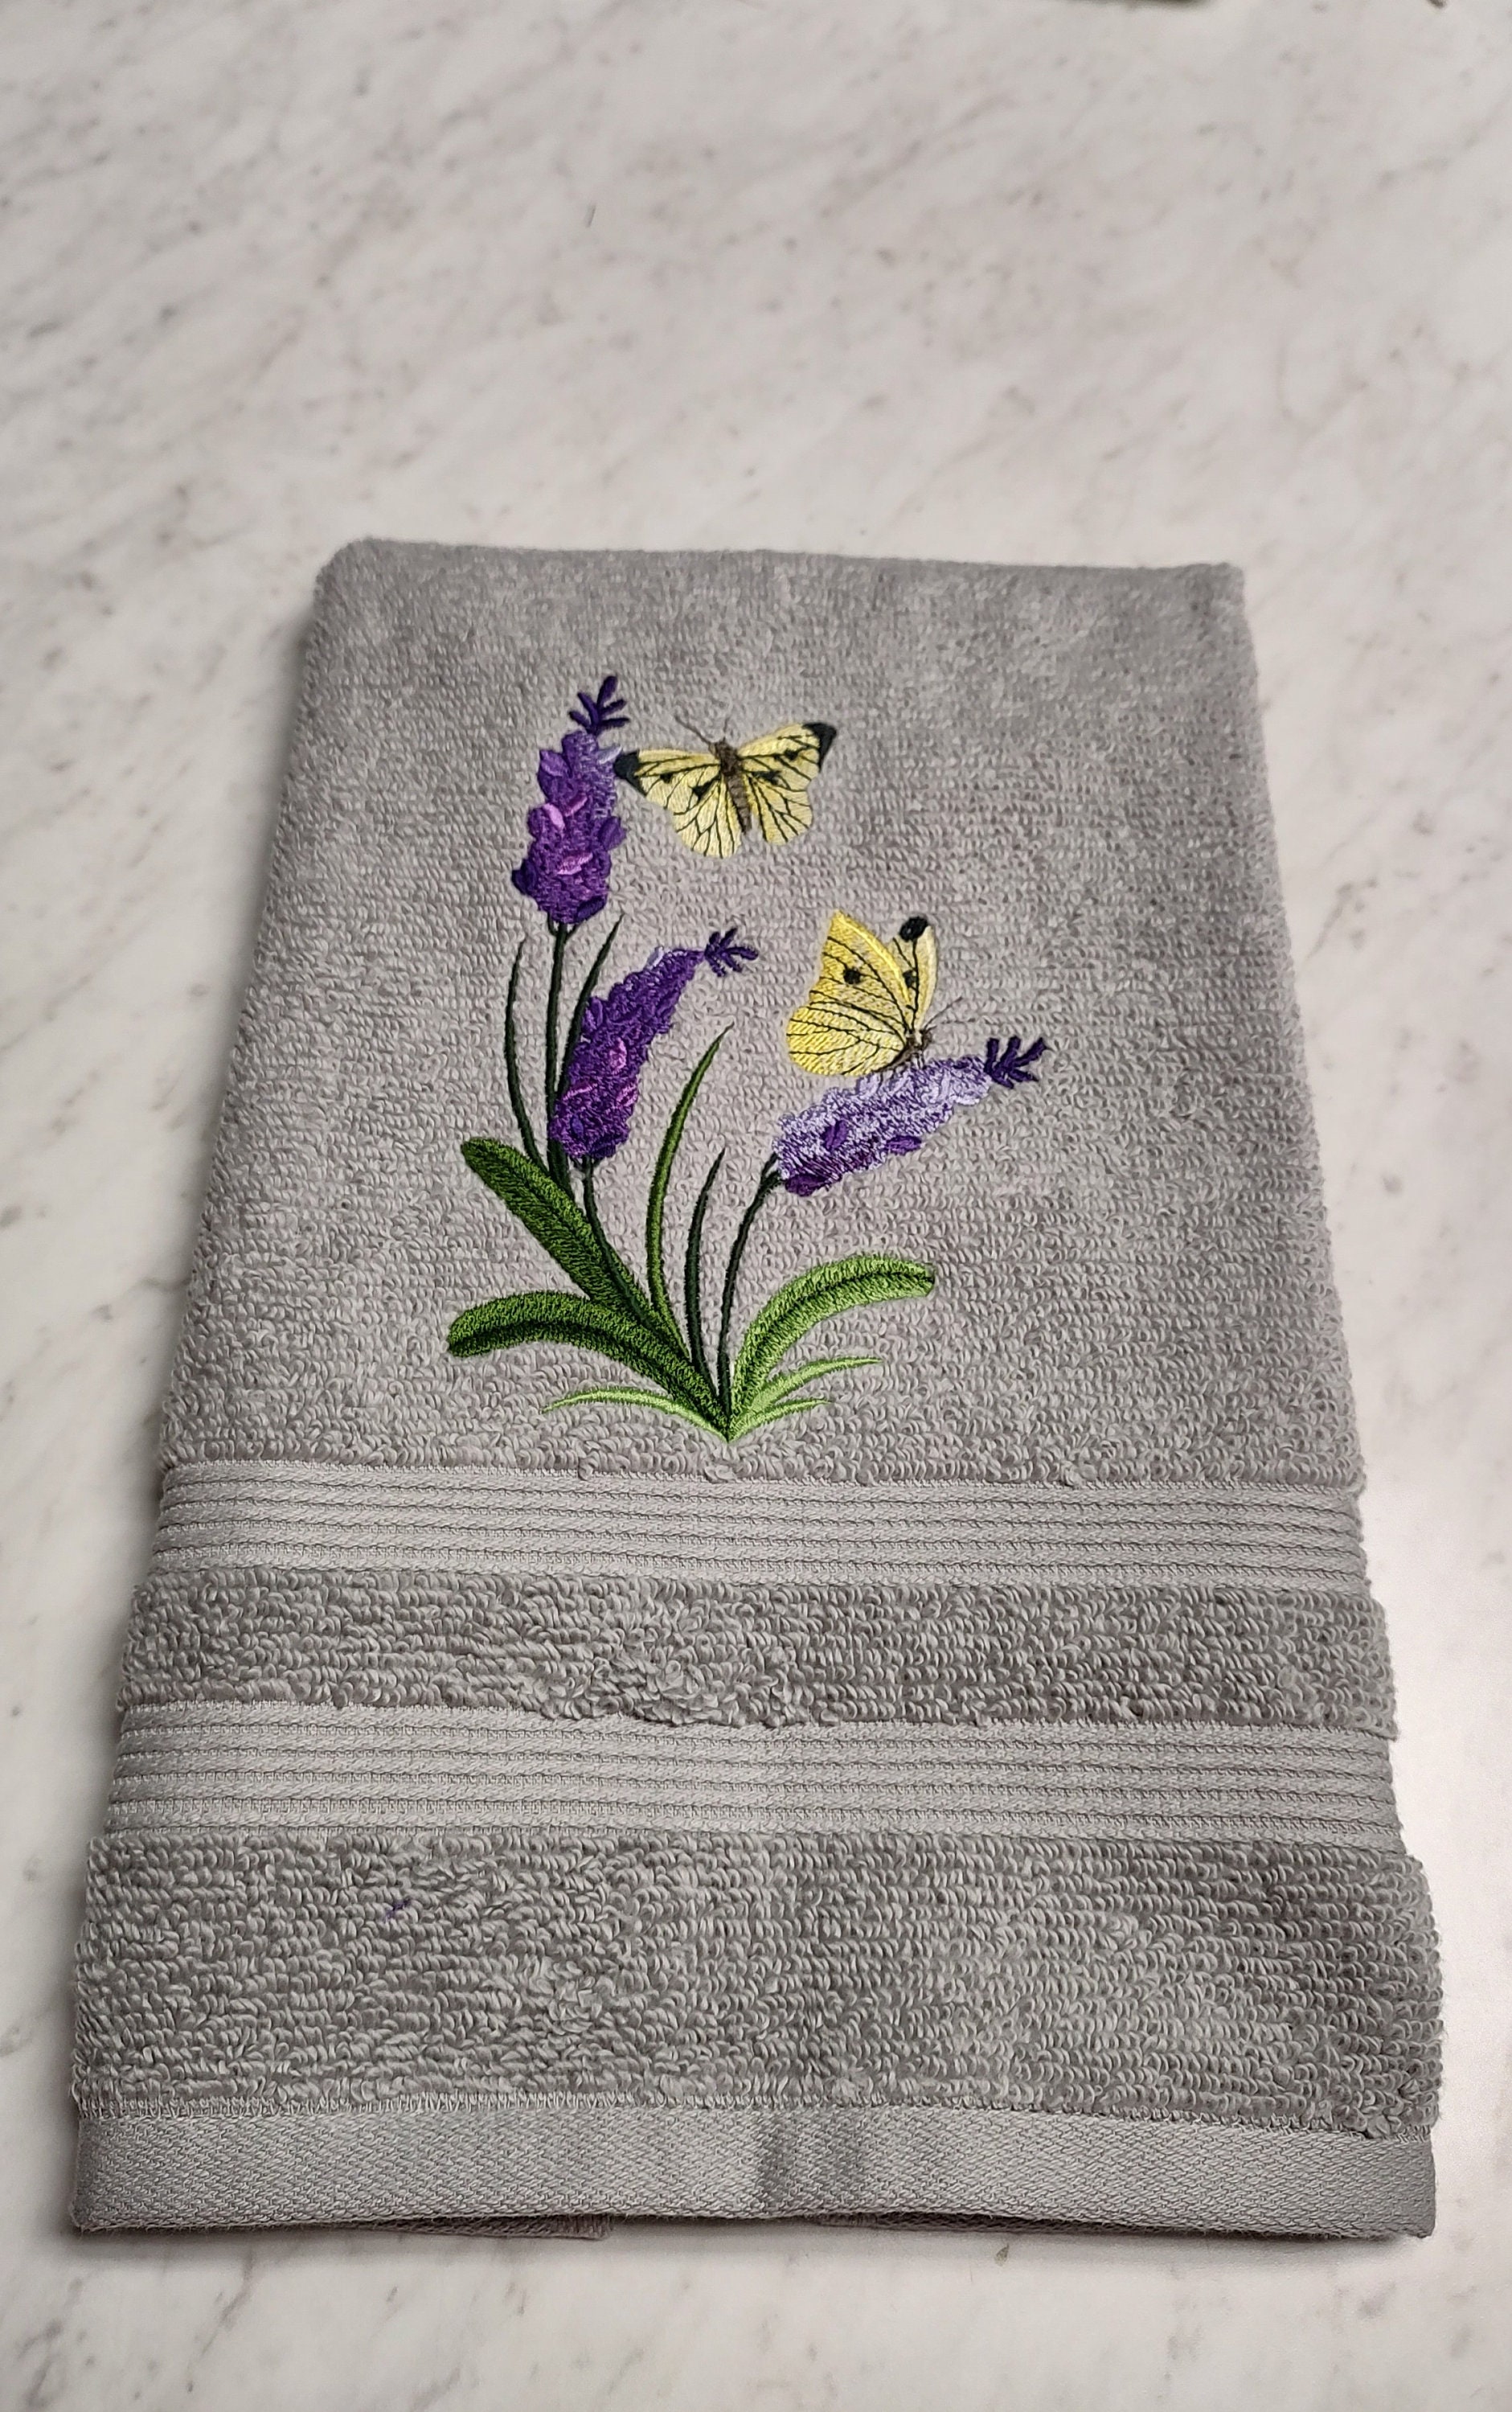 Embroidered Butterflies, Embroidered Hand Towels, Bathroom Decor, White Hand  Towel, Springtime Decor, Cute Hand Towel, READY TO SHIP 